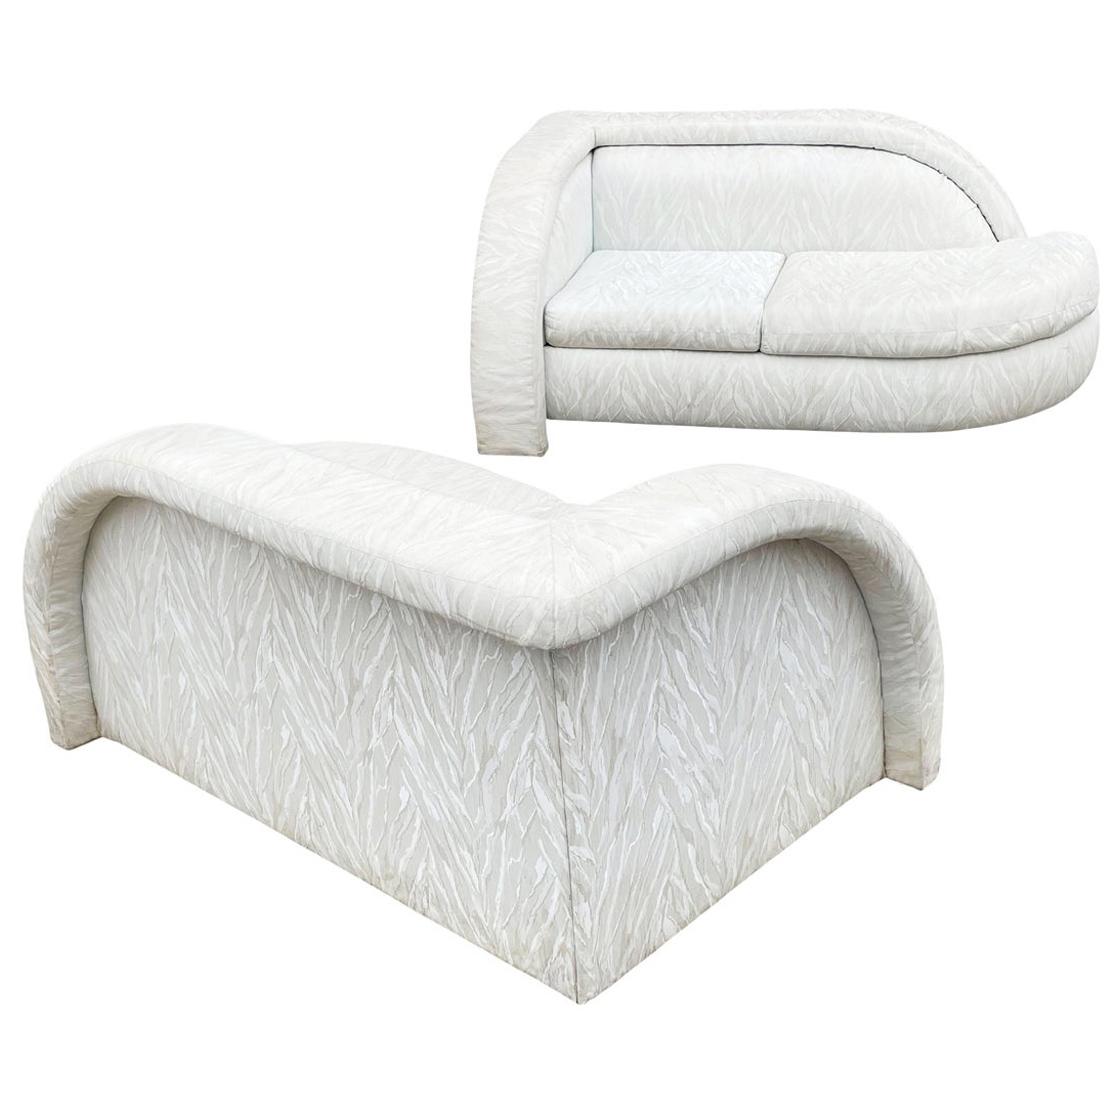 Matching Pair of Hollywood Regency Love Seats or Chaise Lounges in White For Sale